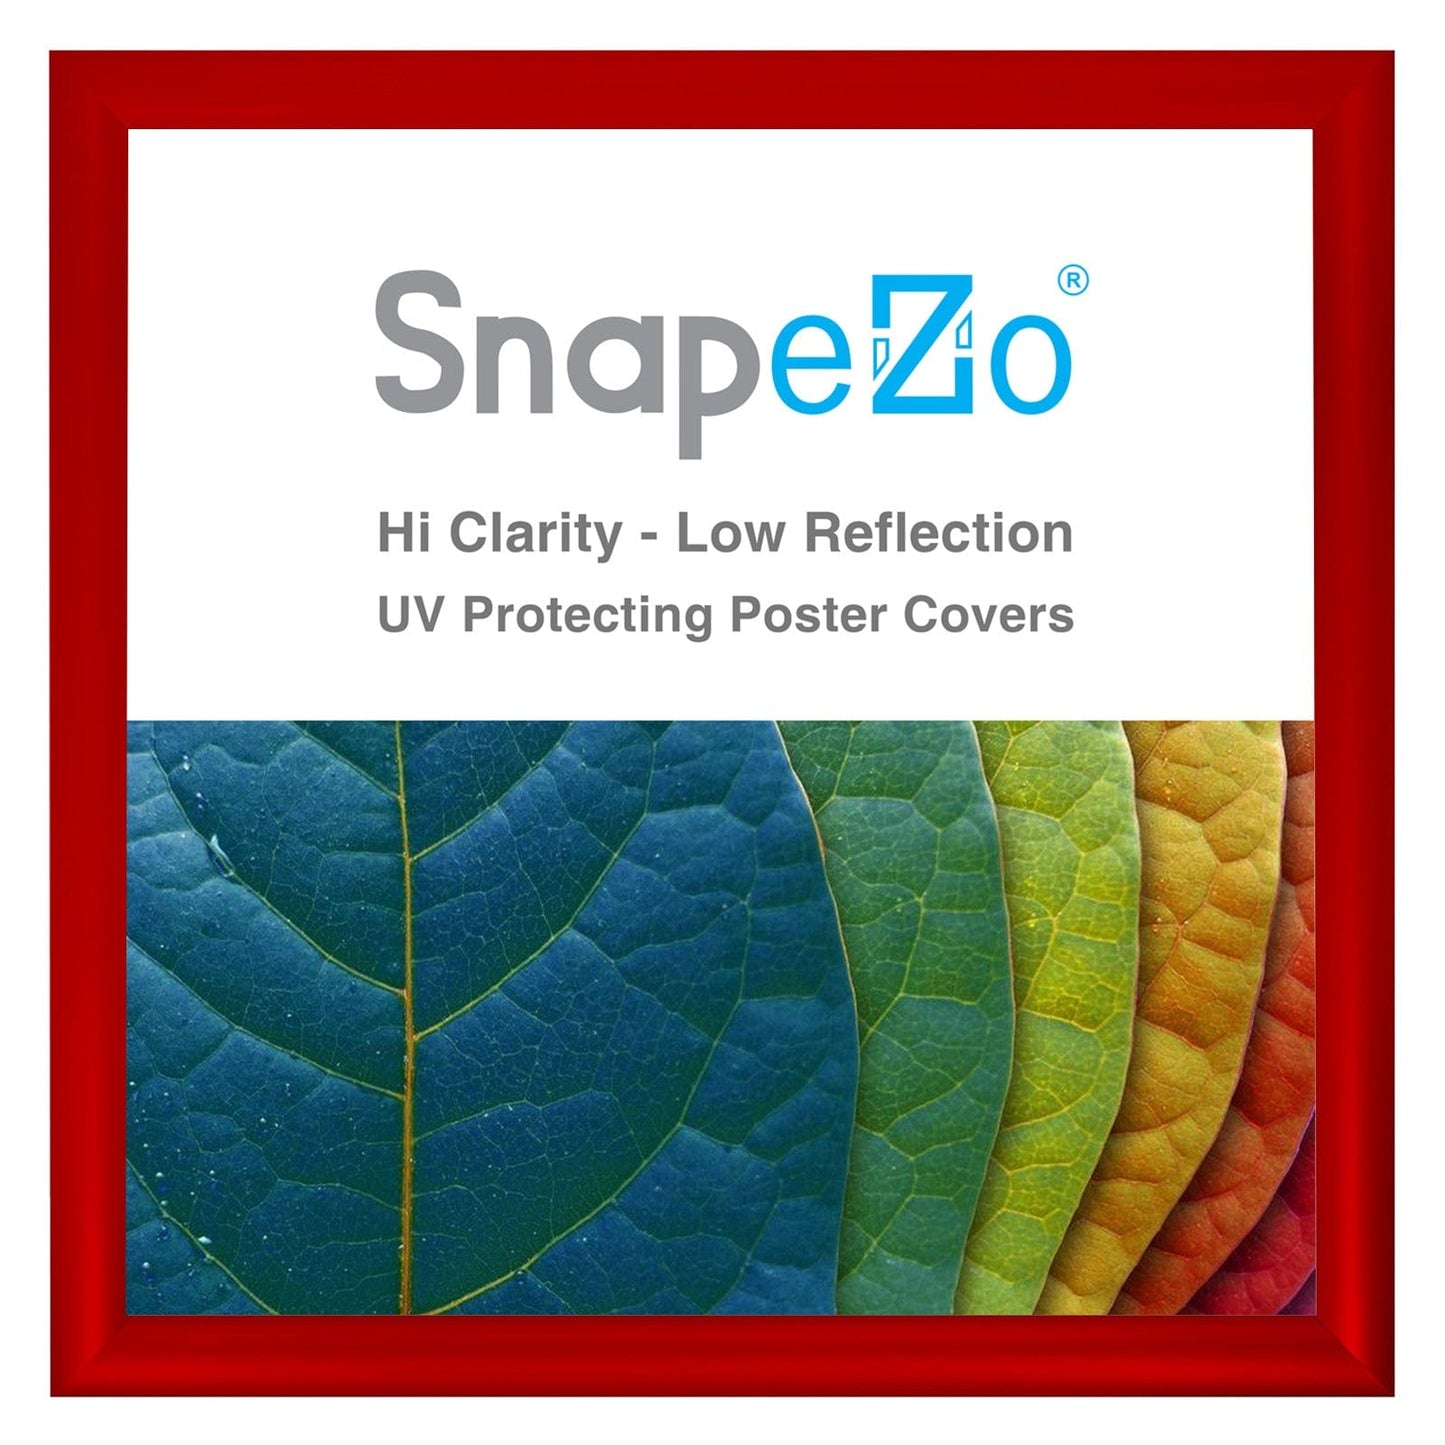 18x18 Red SnapeZo® Snap Frame - 1.2" Profile - Snap Frames Direct